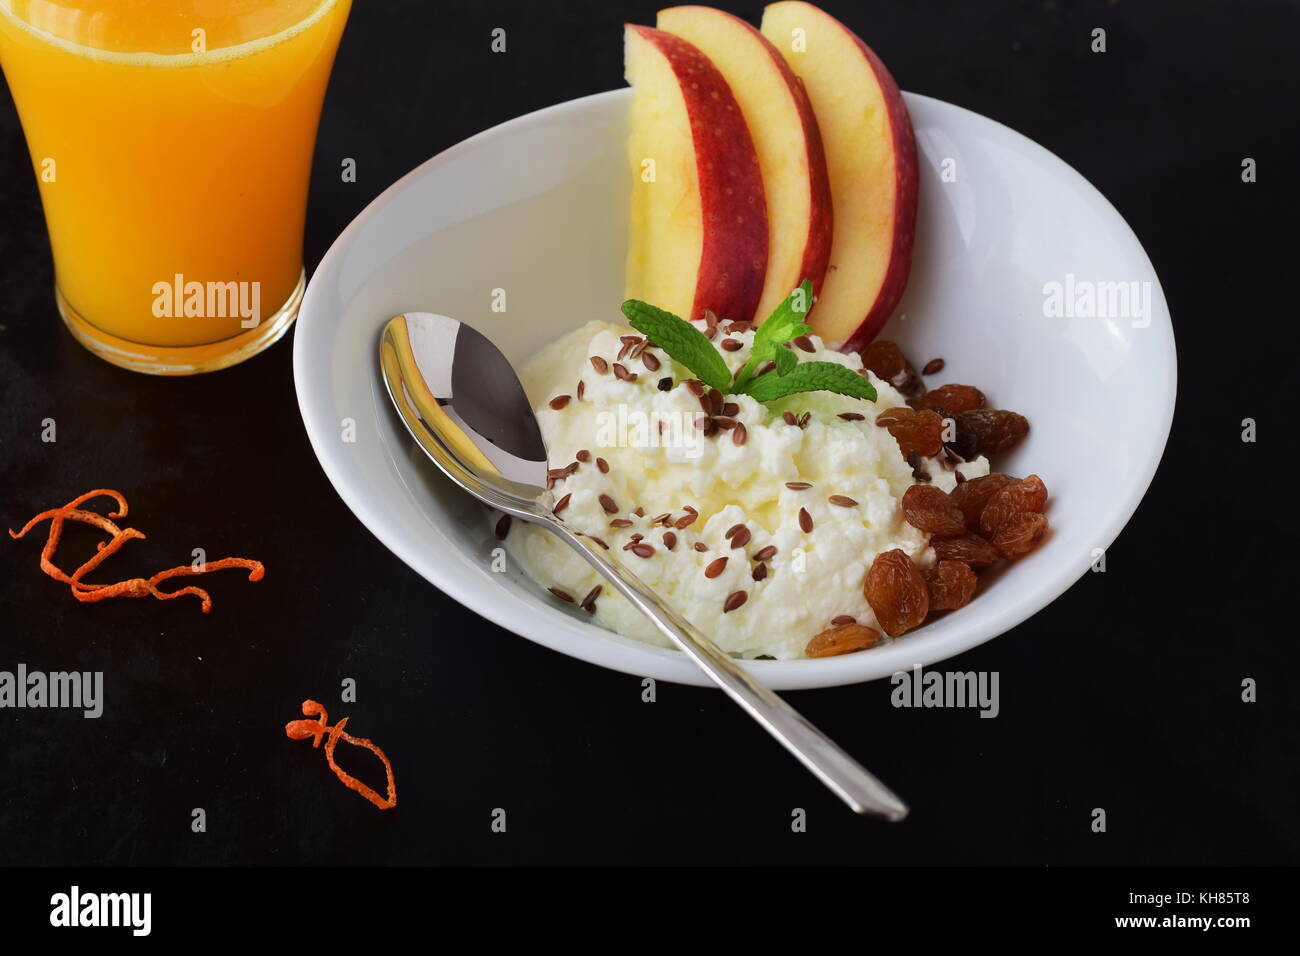 Healthy breakfast: cottage cheese with flax seeds, raisins, fresh apples and a glass of fresh orange juice. Healthy eating concept Stock Photo